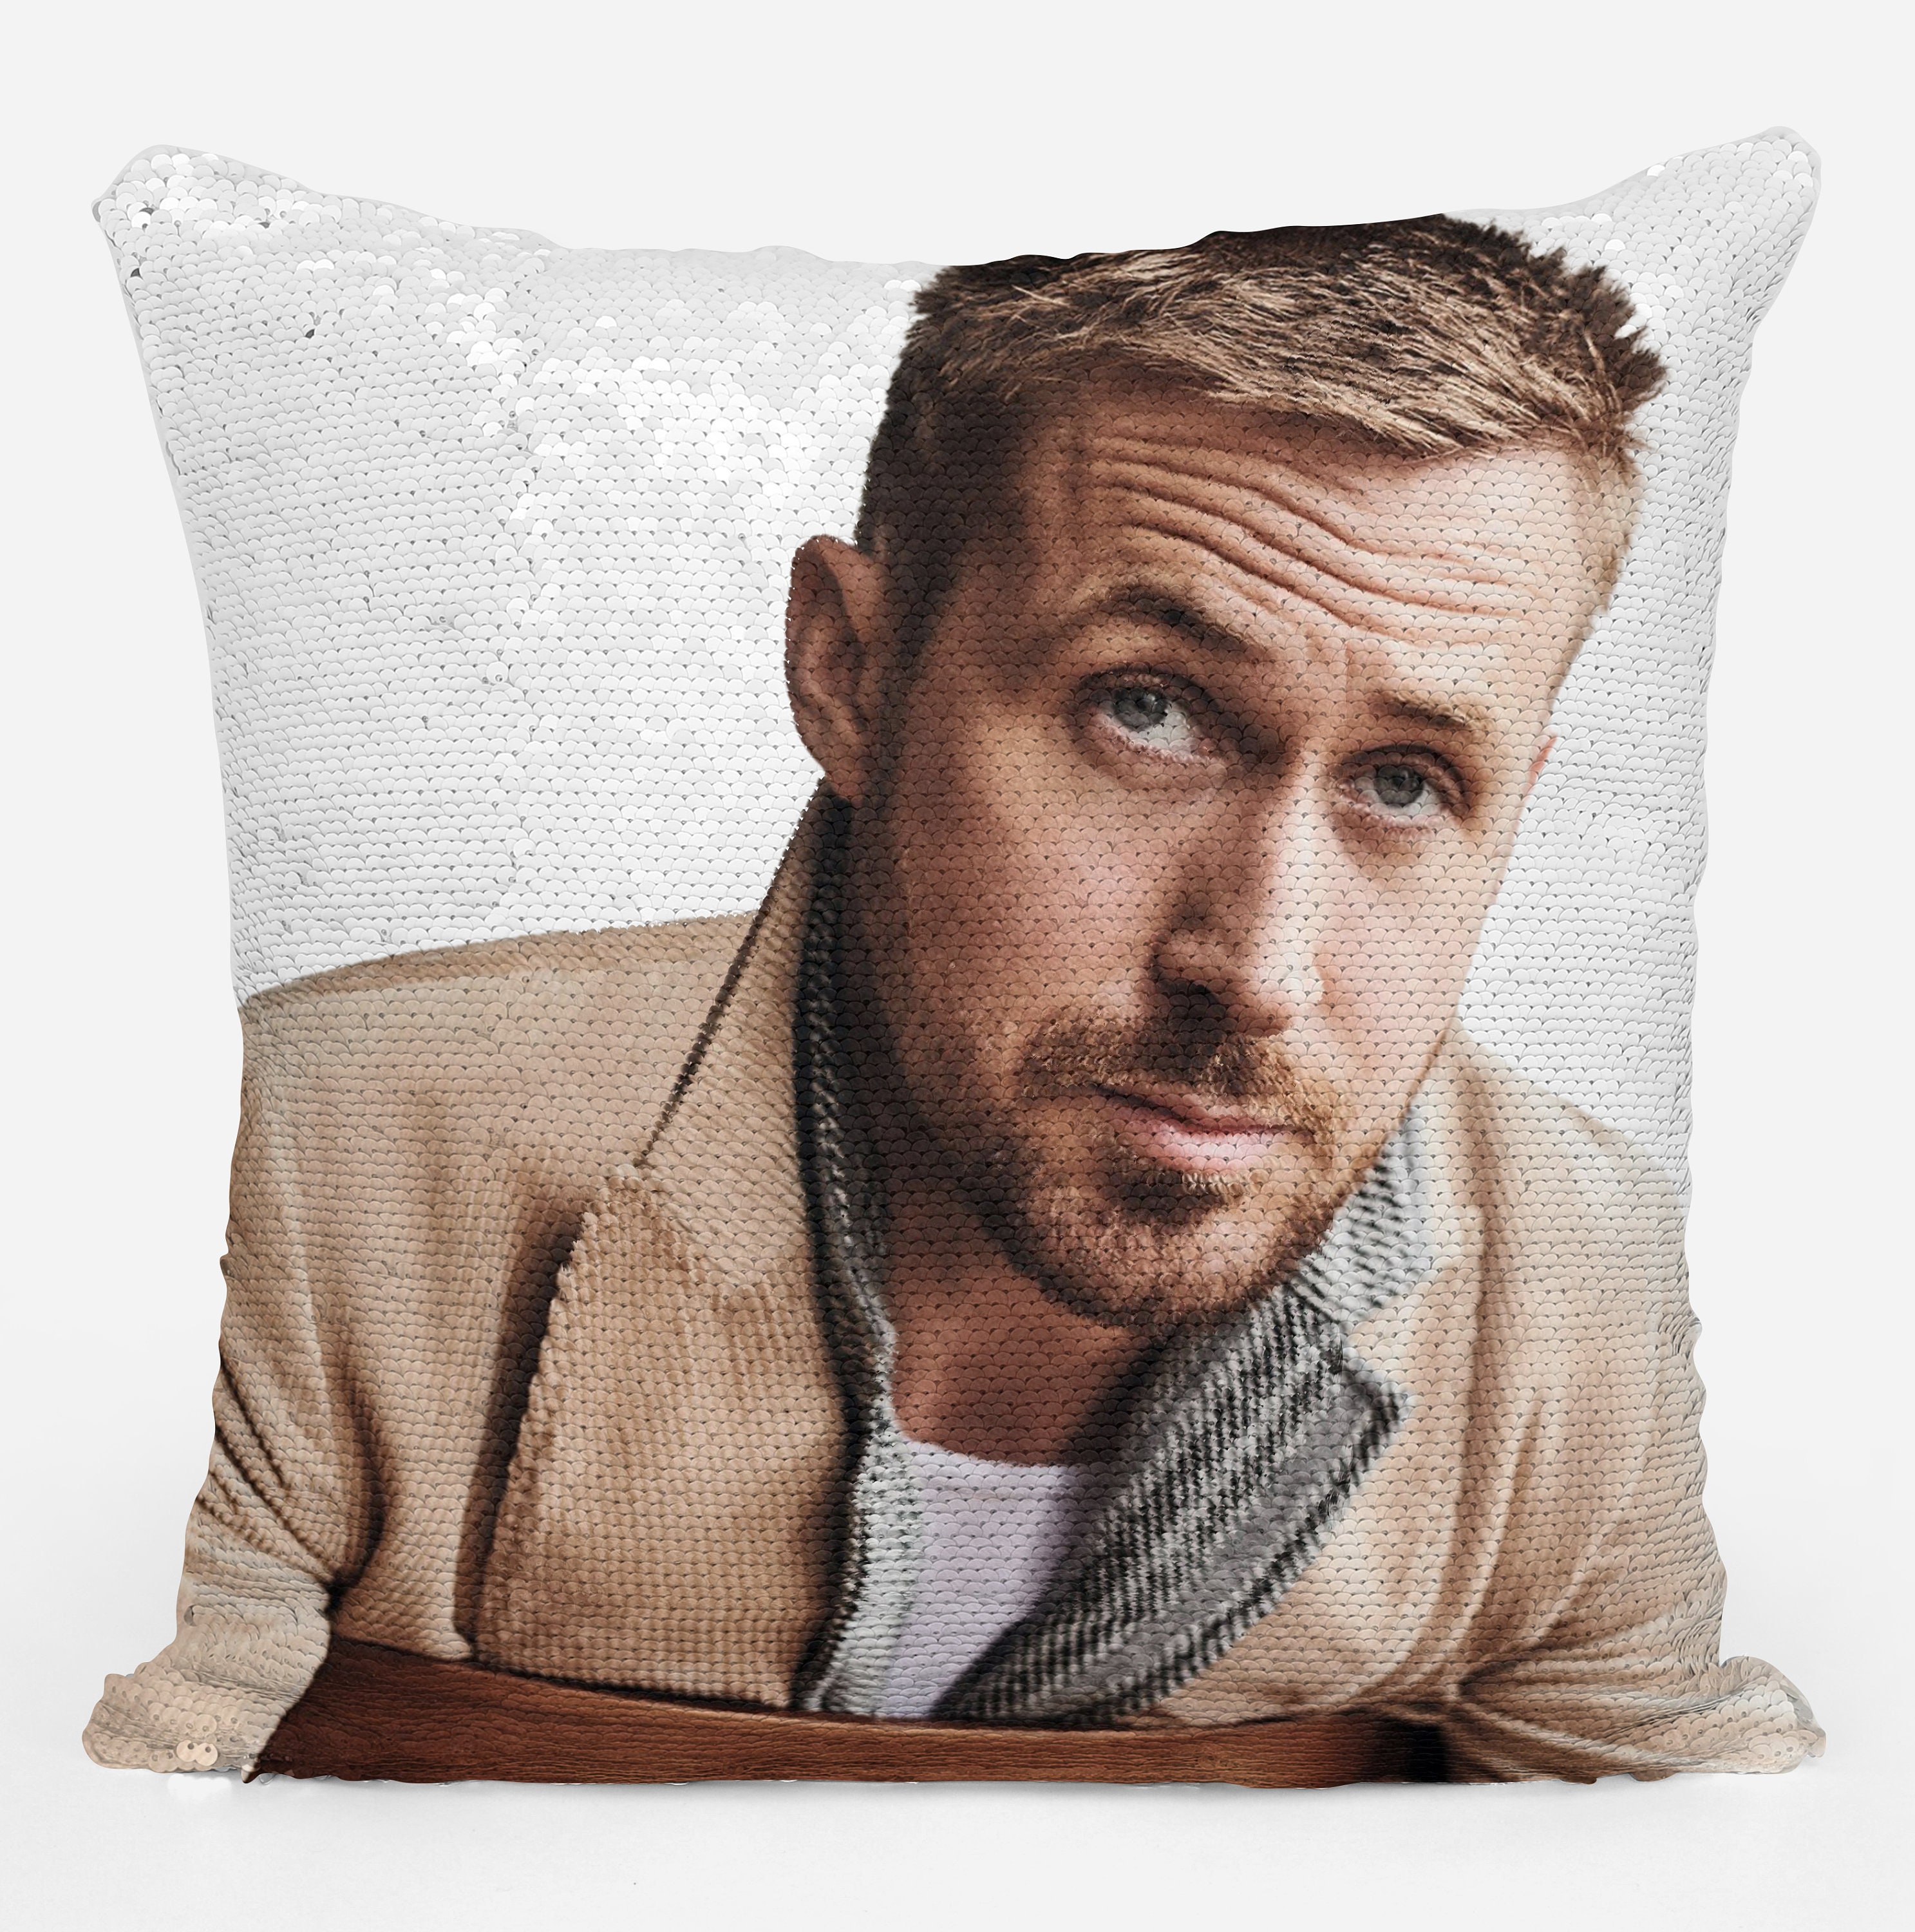 Ryan Gosling Sequin Pillow Celebrity Pillow Cushions Cool Pillow Case Funny  Gift Idea for Lars and the Real Girl Movie Fans 